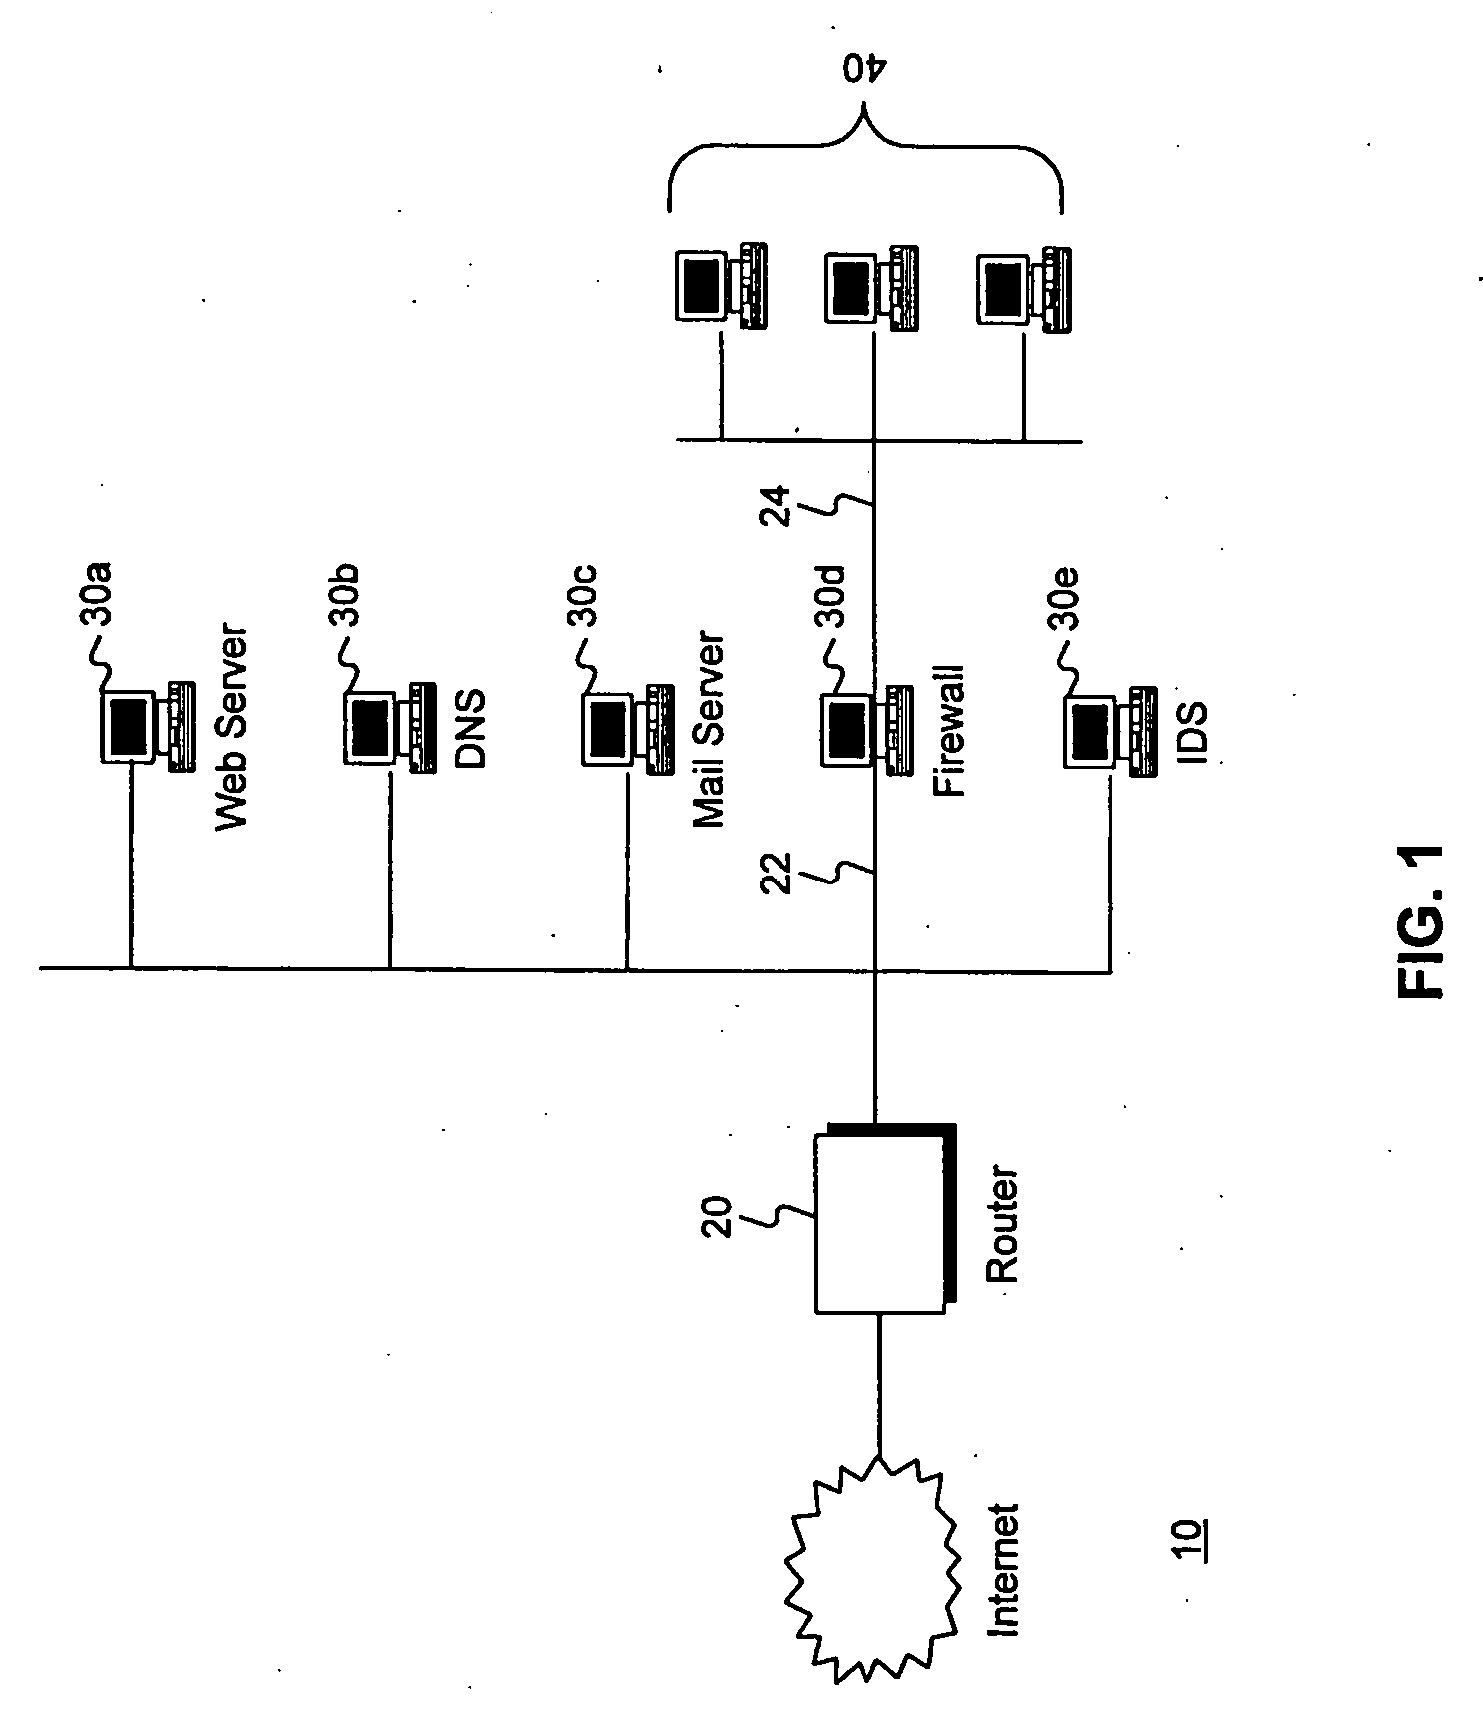 Intrusion and misuse deterrence system employing a virtual network